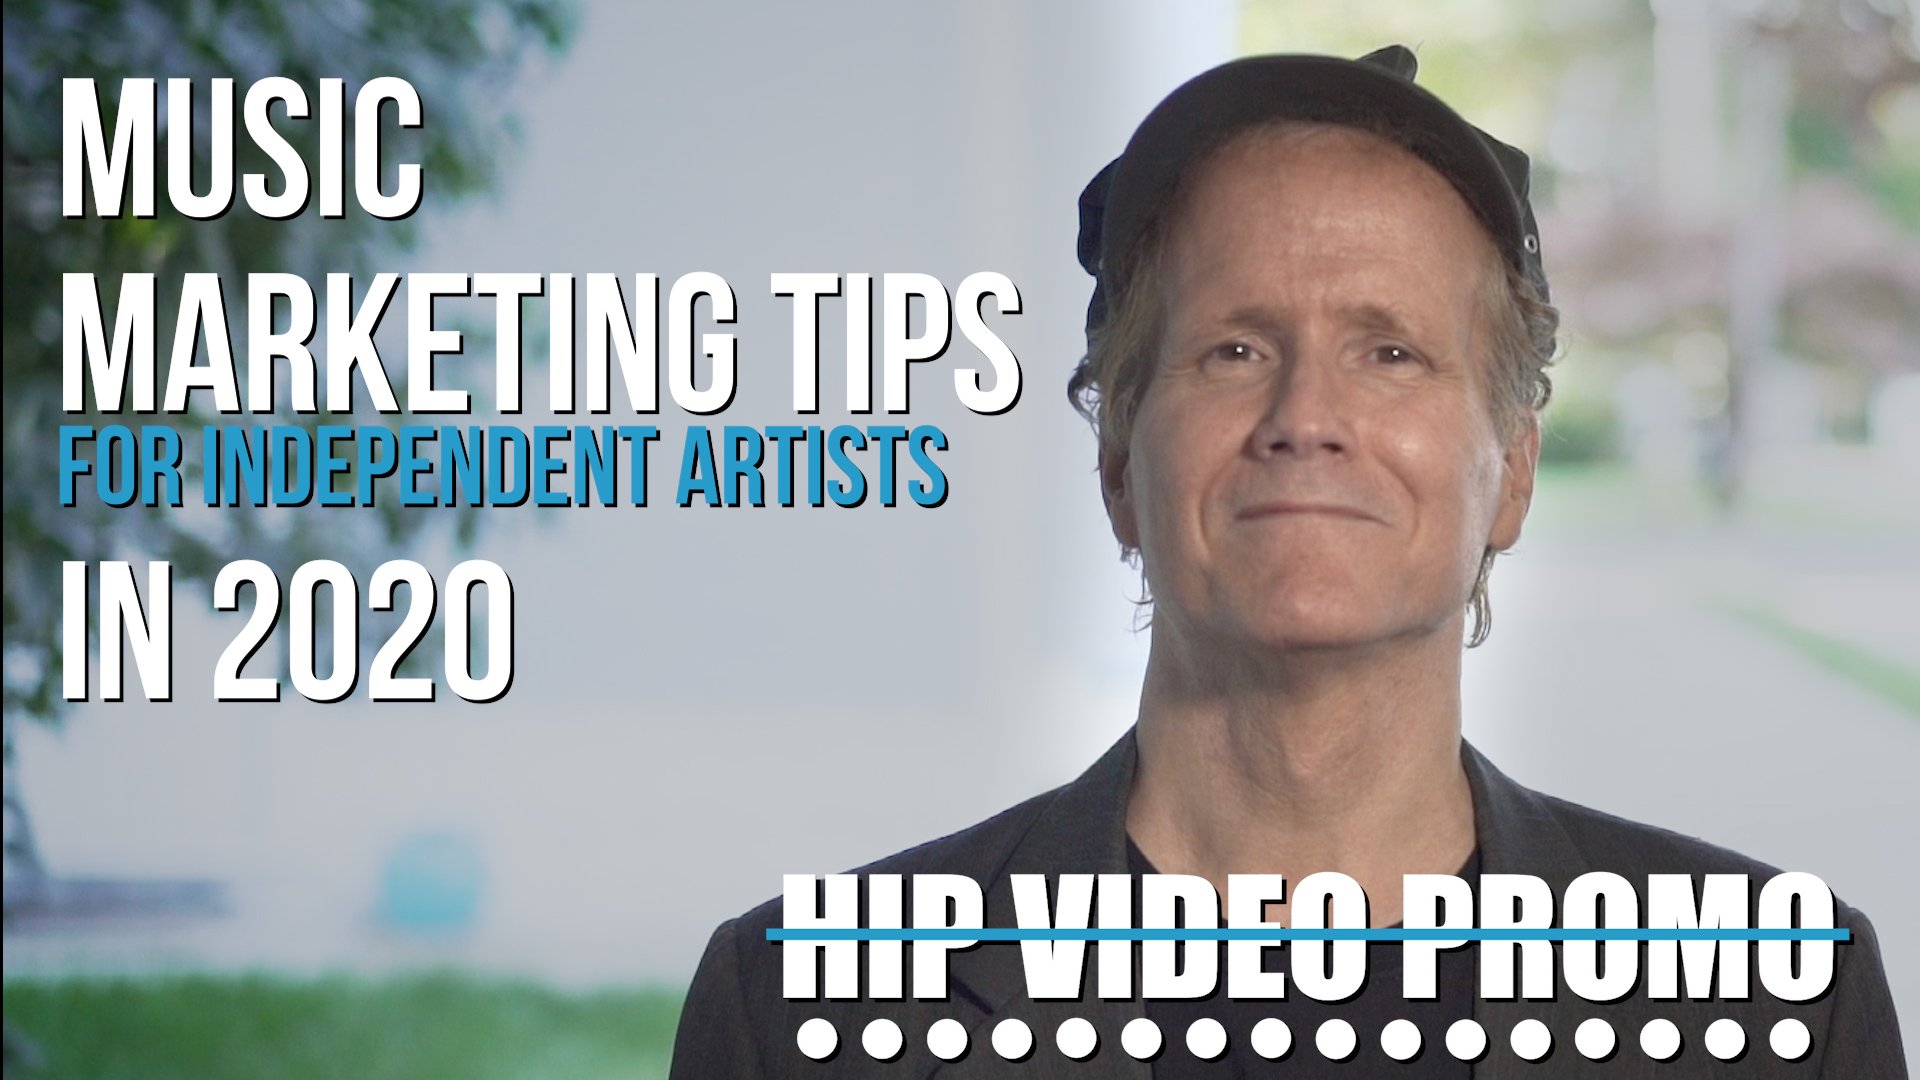 Music Marketing Tips for Independent Artists in 2020